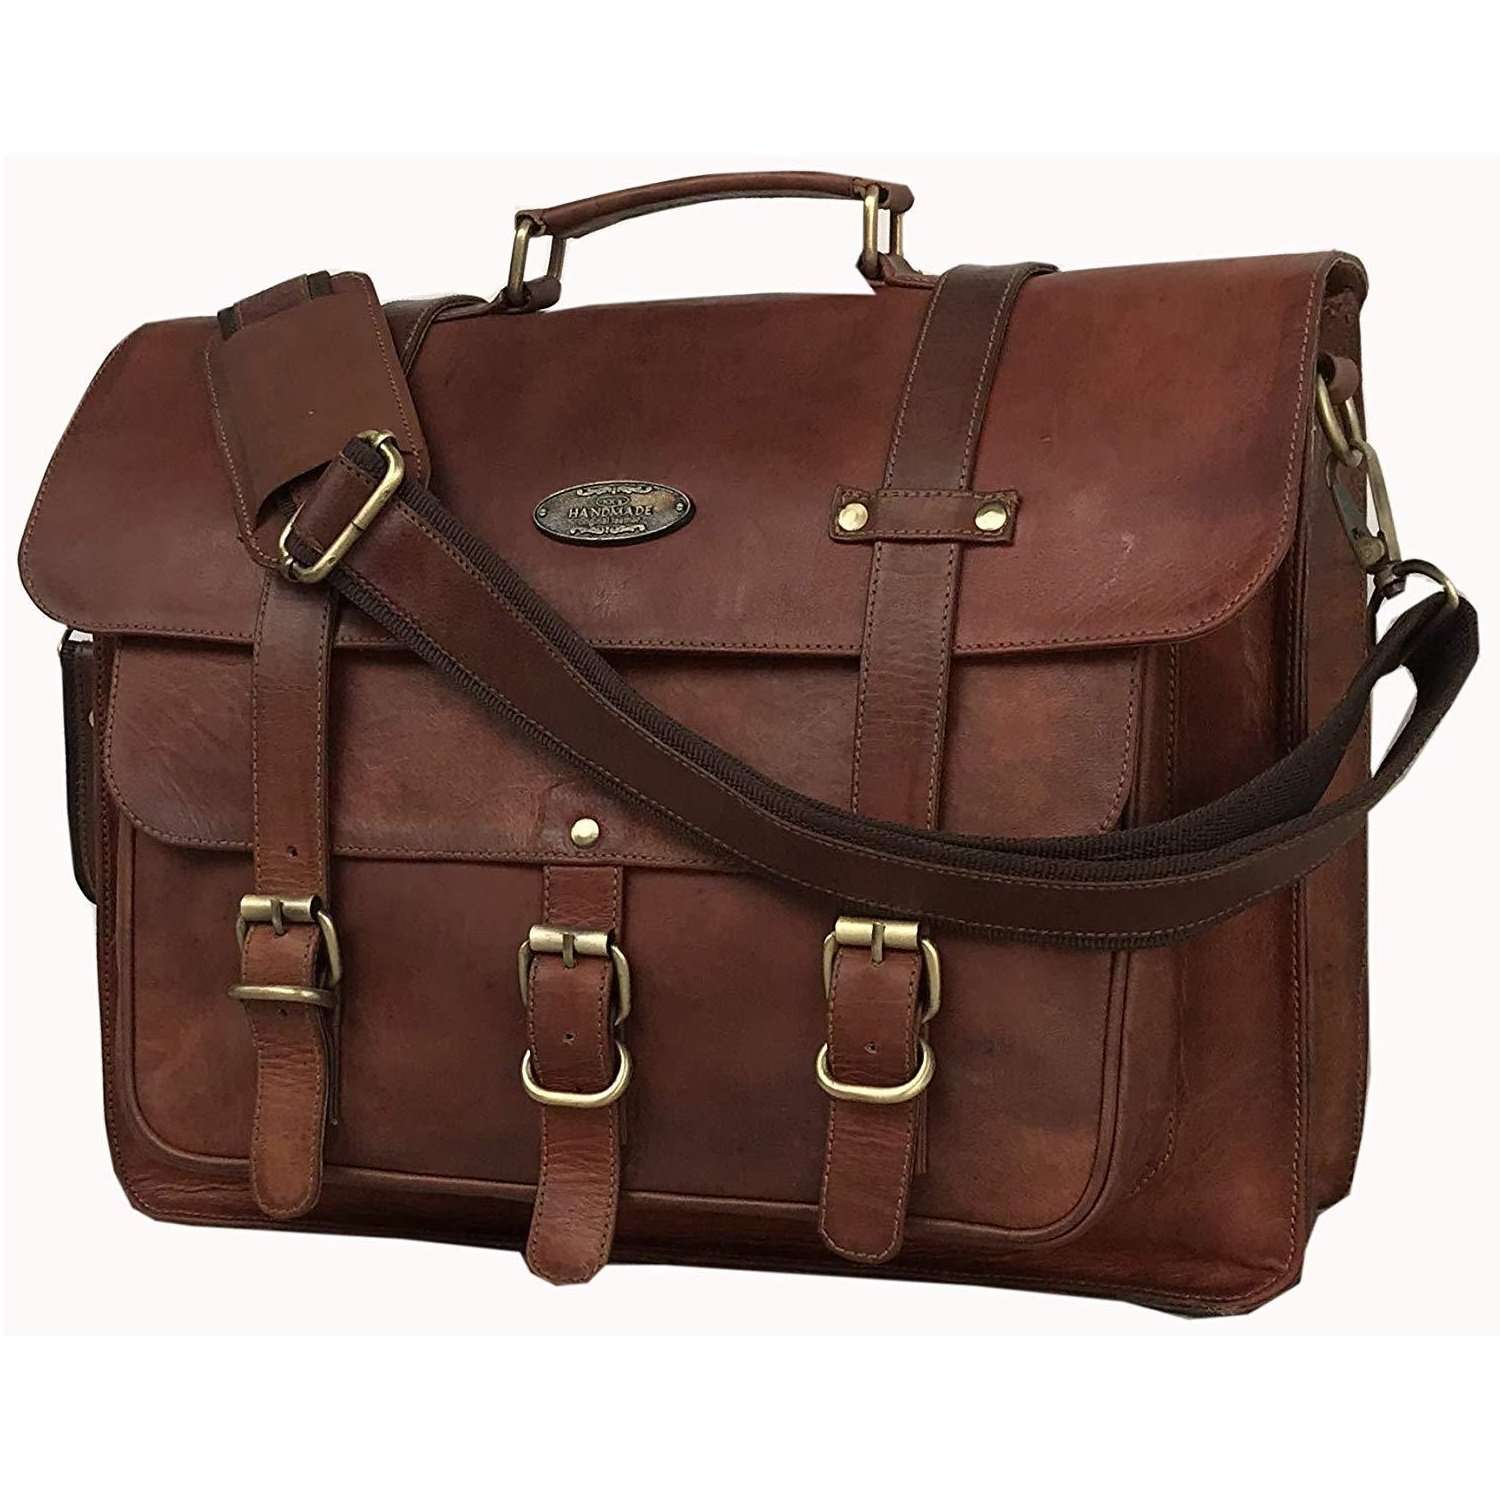 Leather Messenger Bags Manufacturers in Delhi, Genuine Leather ...